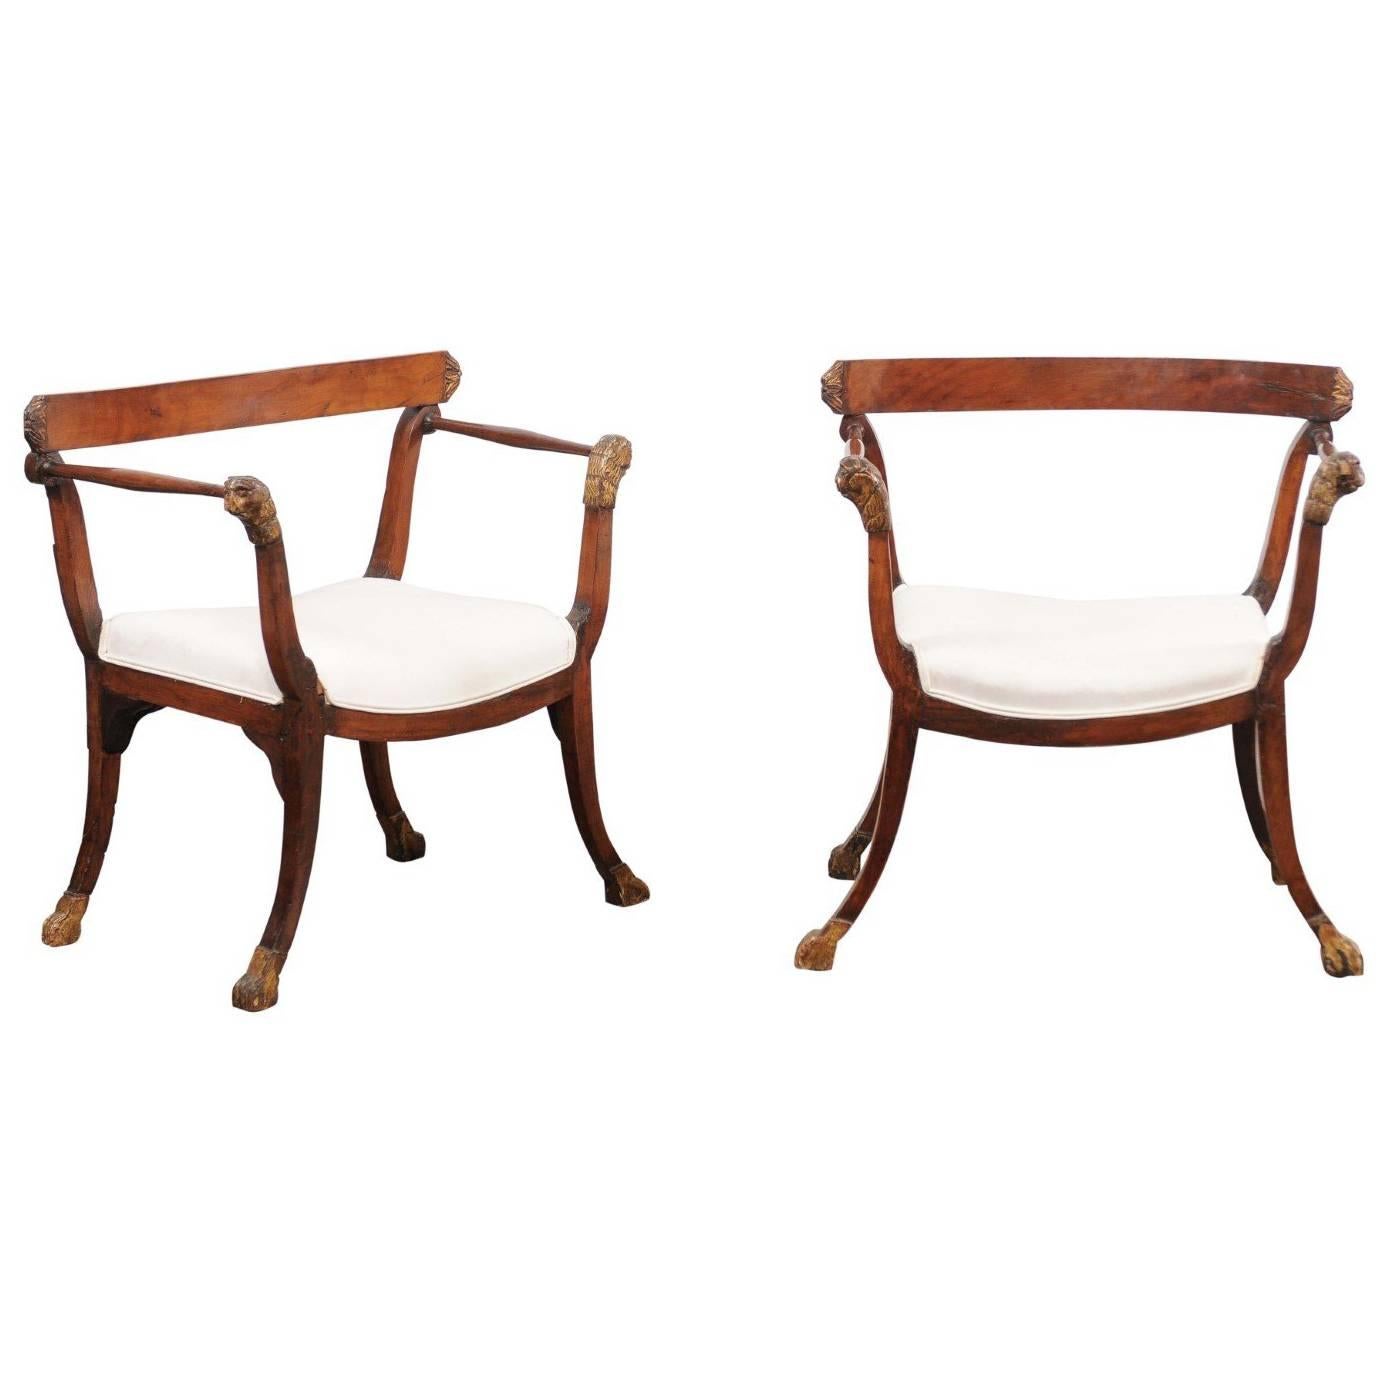 Pair of 18th Century Italian Upholstered Seat Walnut Chairs with Lion Details